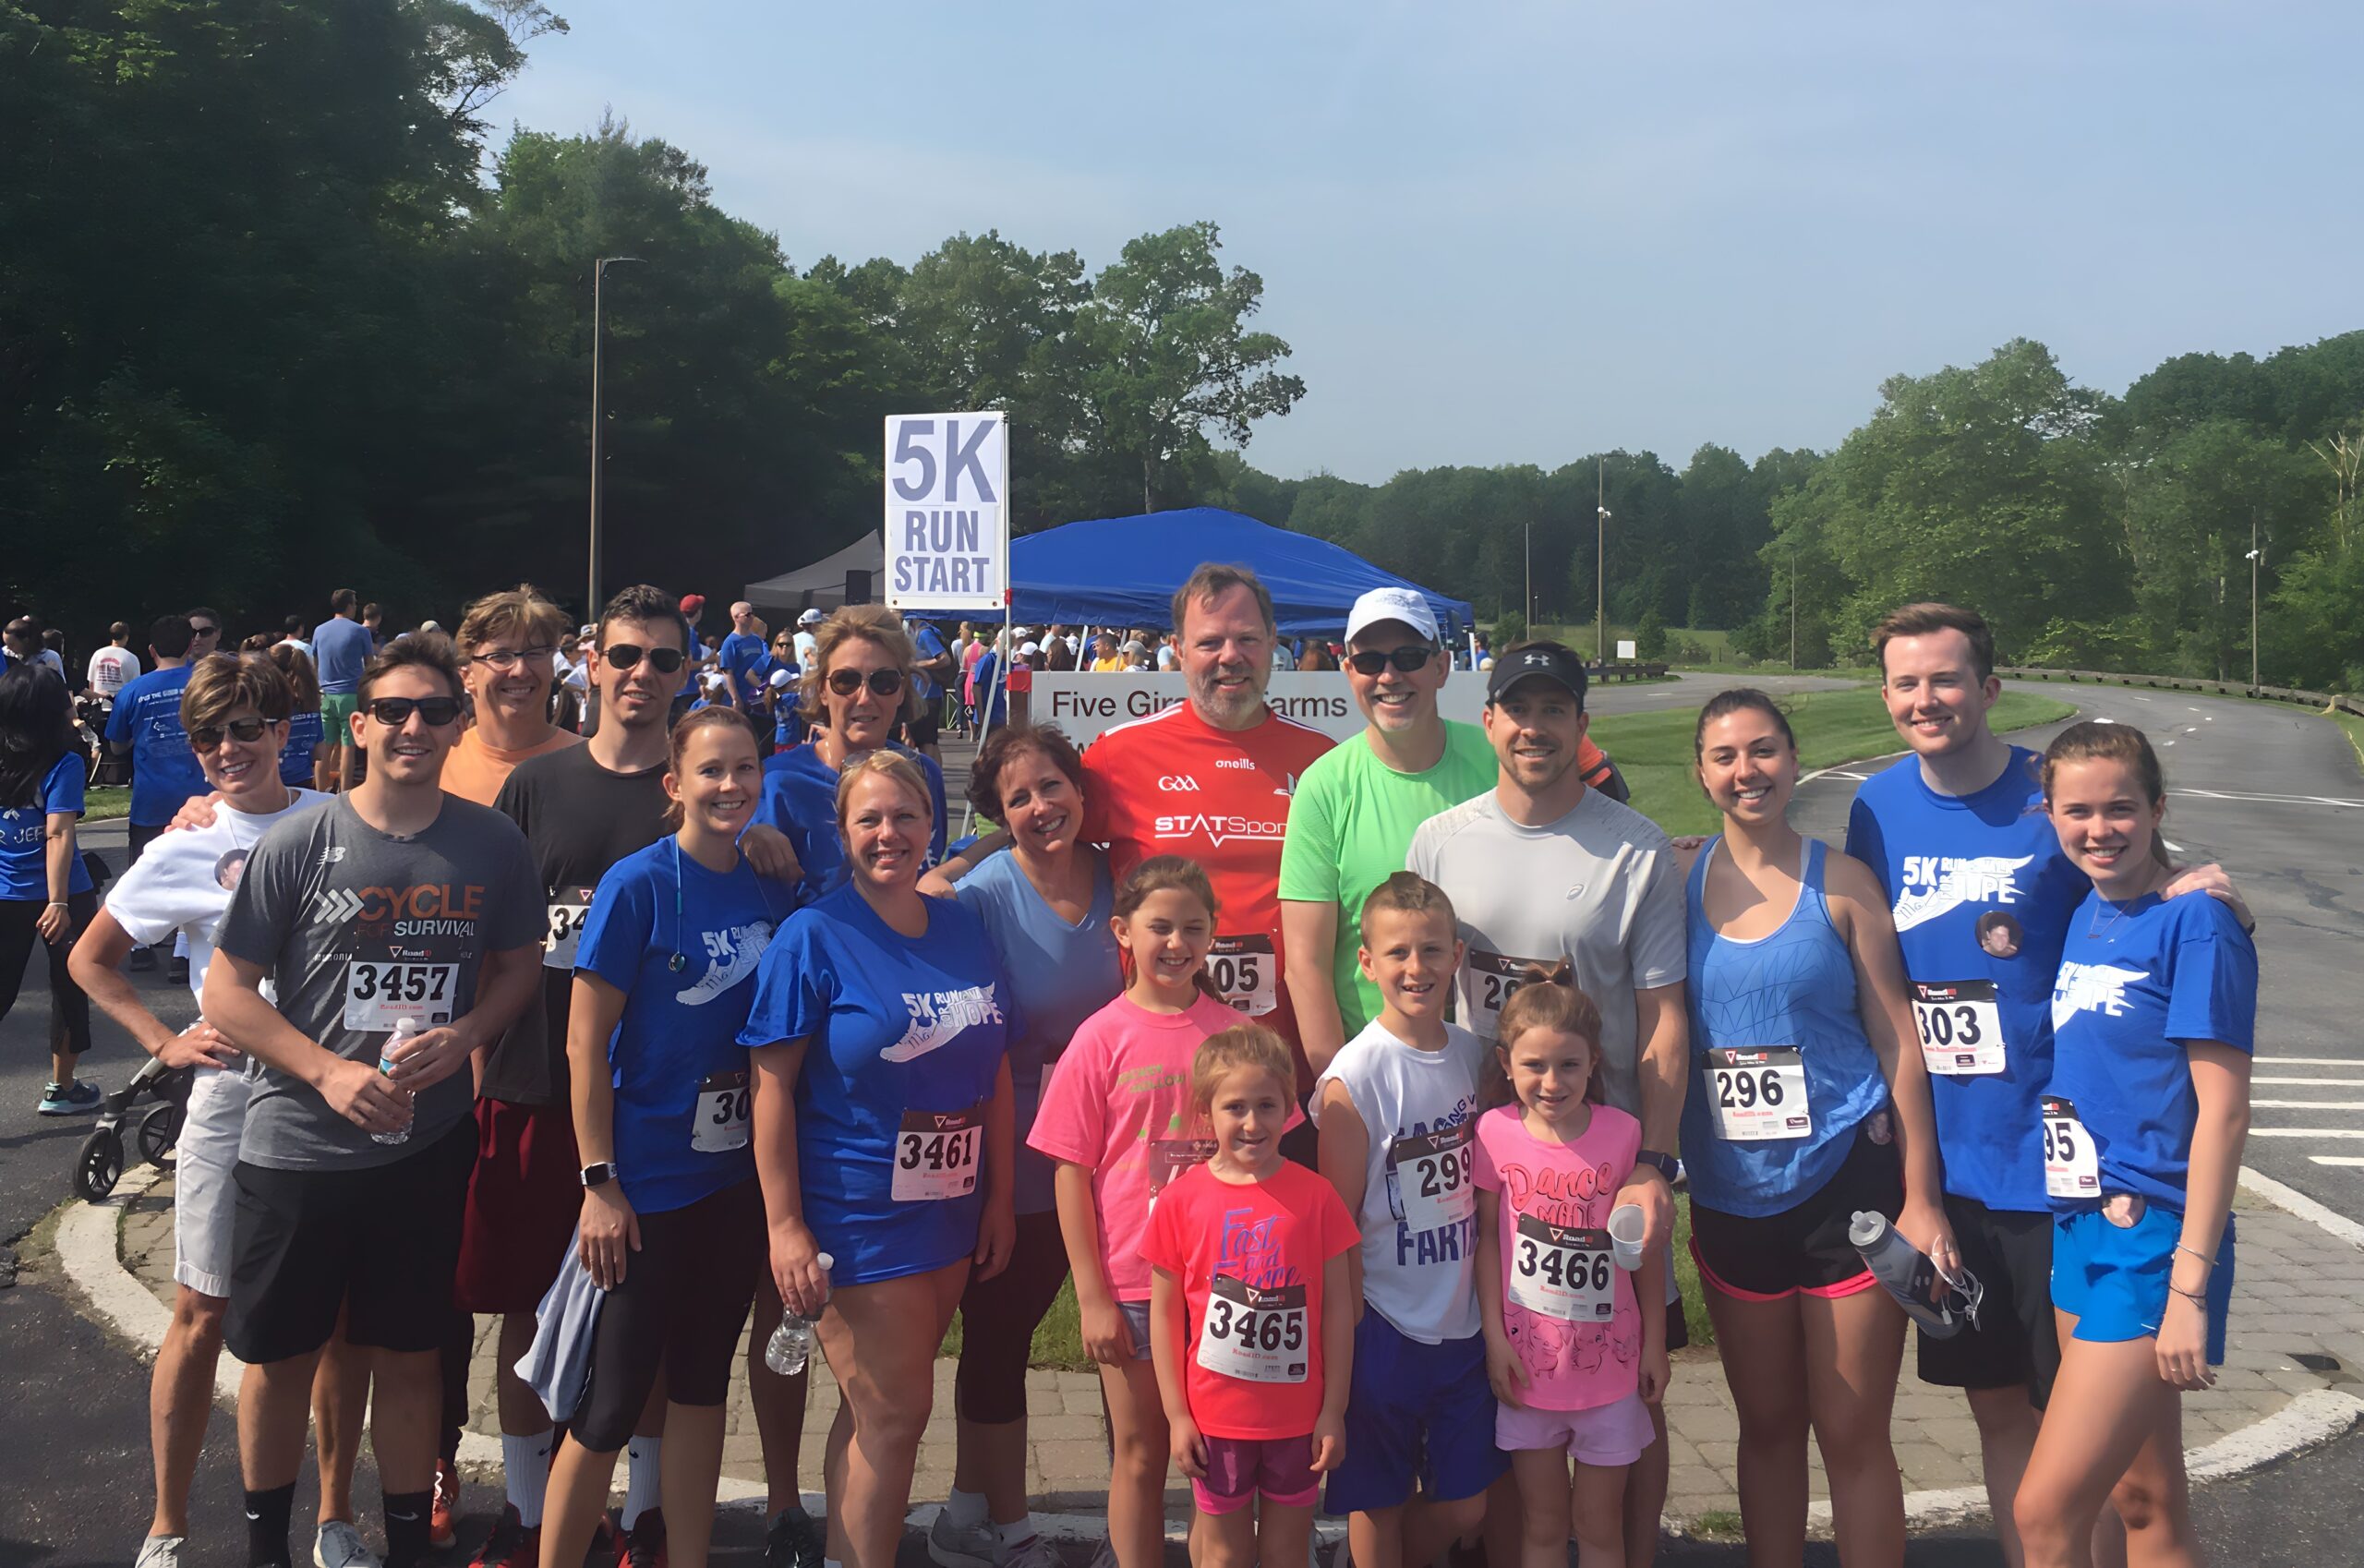 Private Advisor Group participating in a 5k event, promoting community wellness.